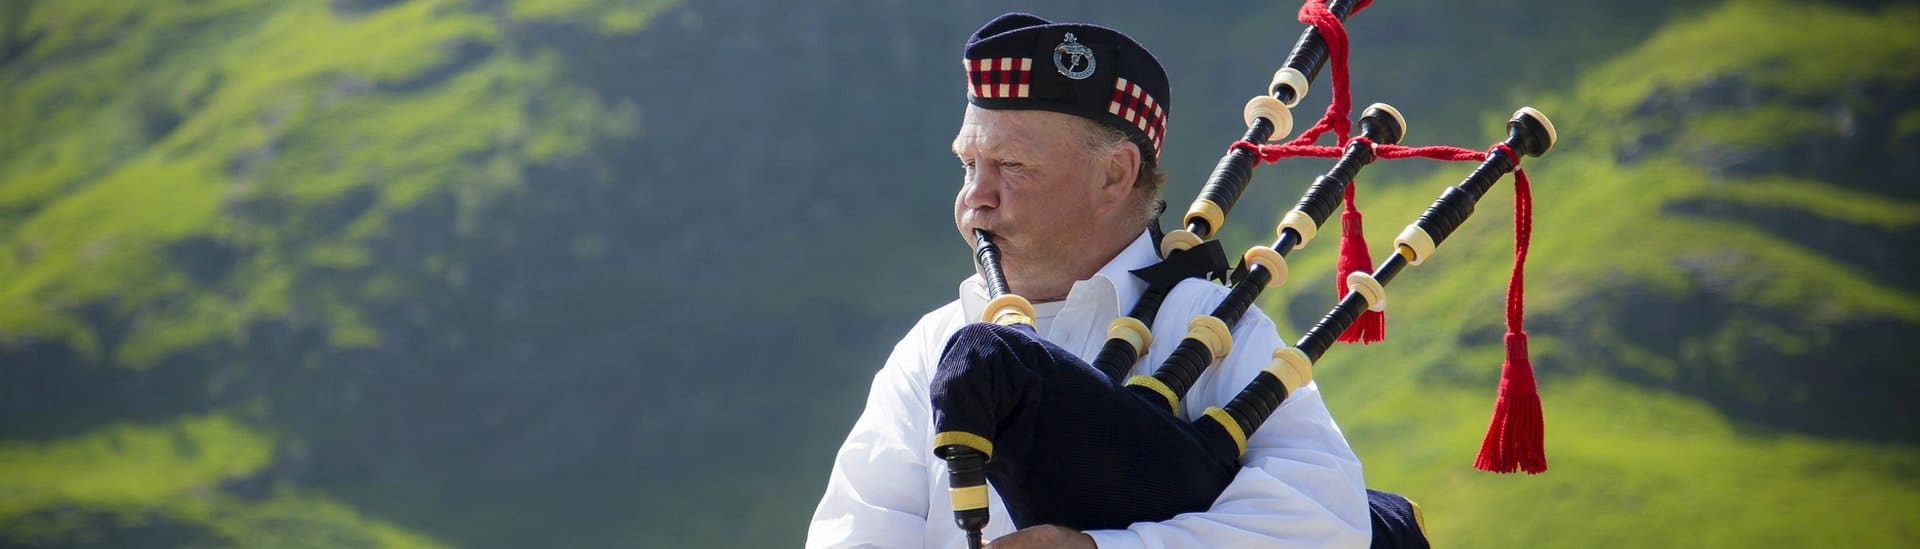 bagpipe tuning chart 5 best bagpipes dec 2019 reviews buying guide. 